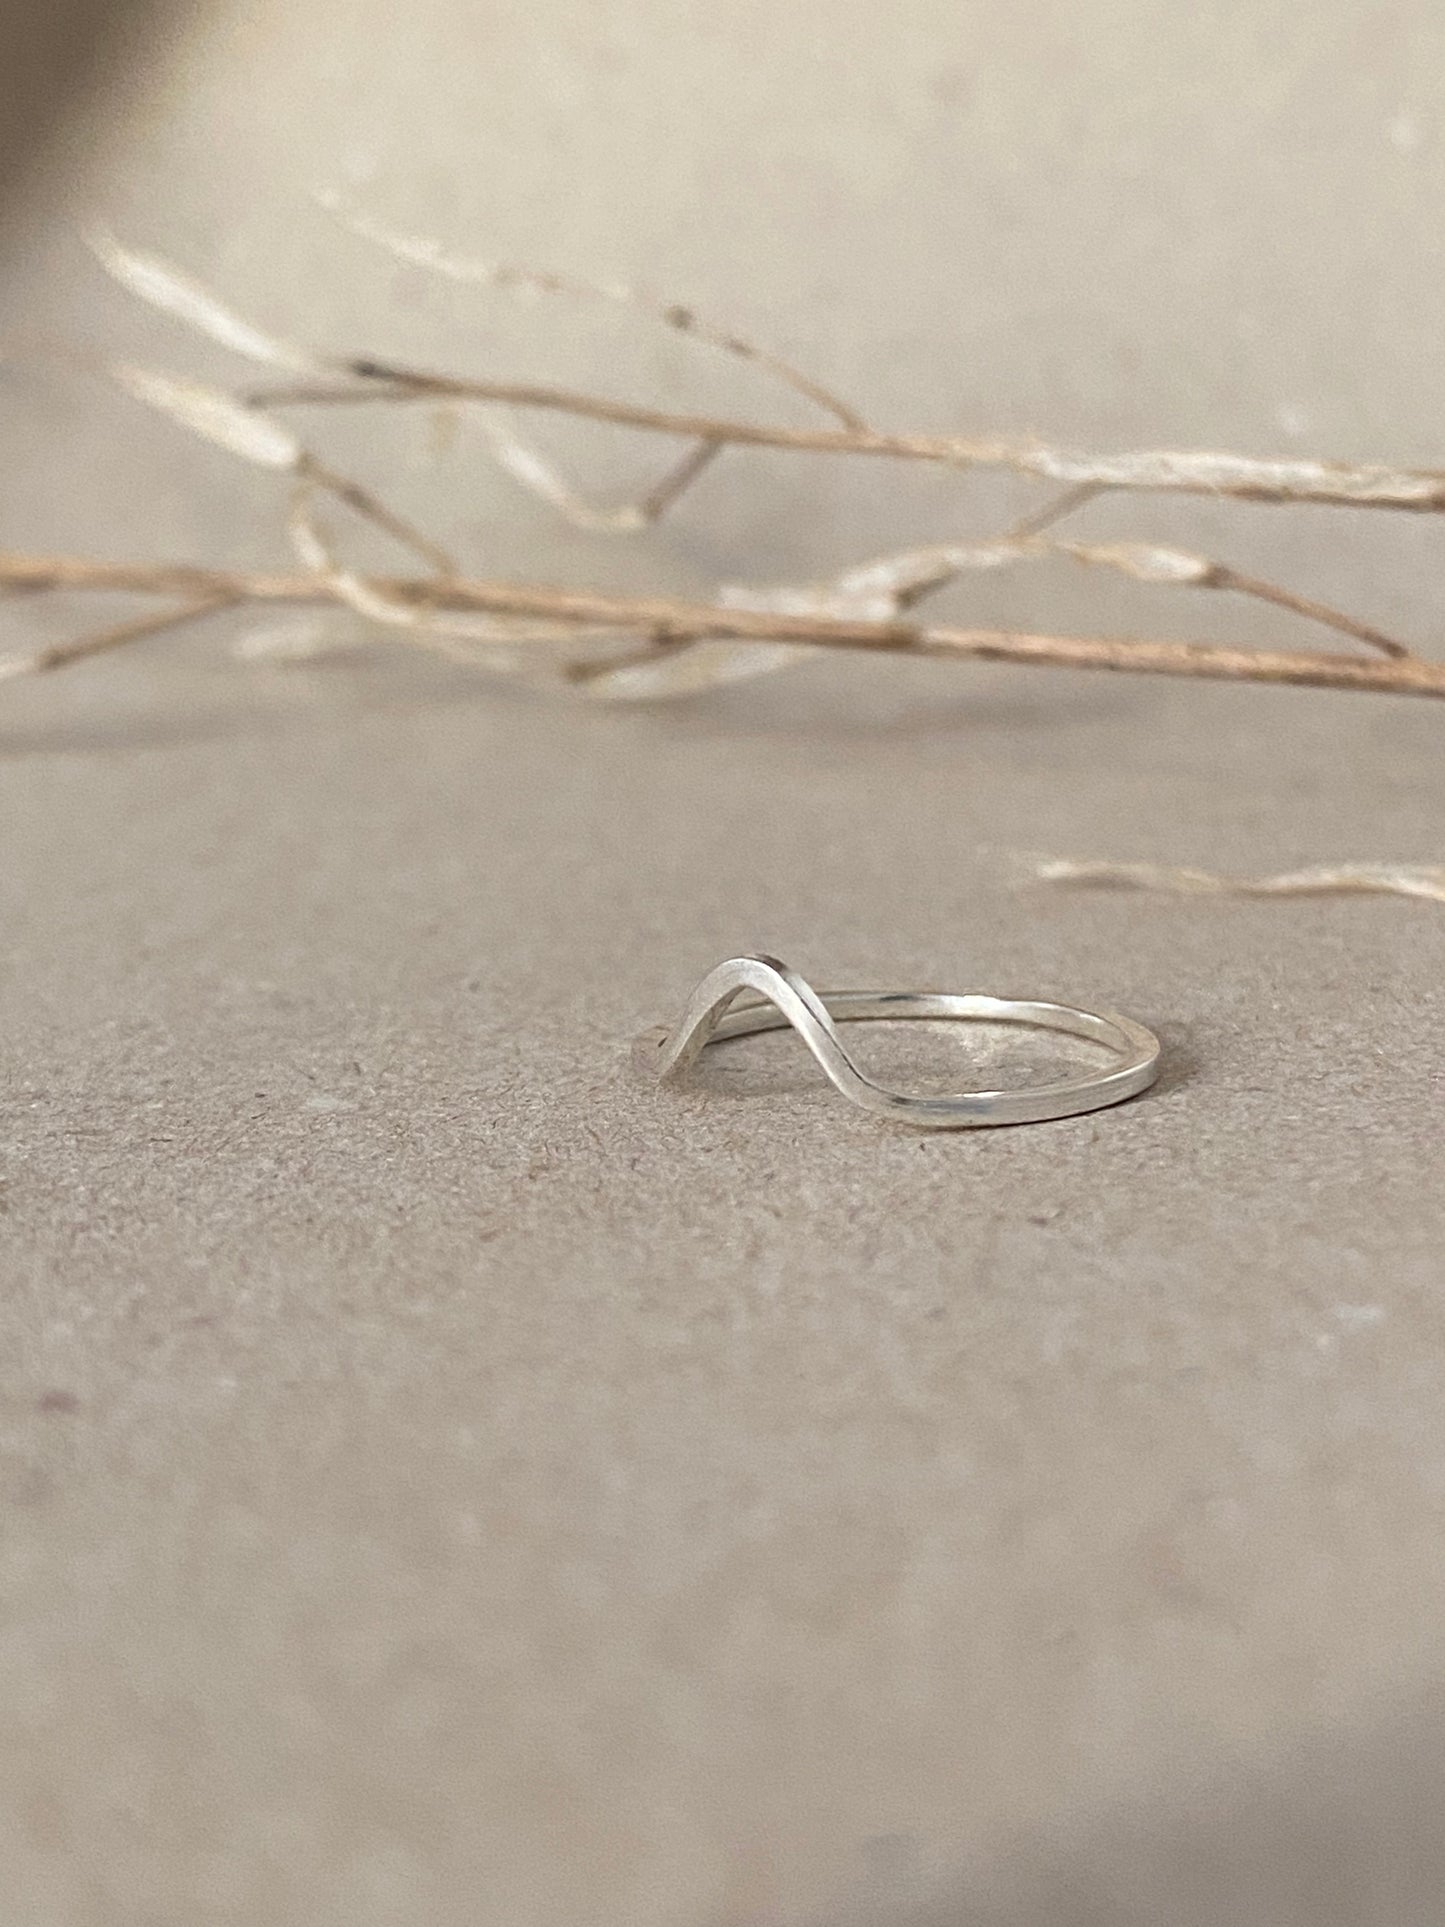 Rounded V Ring - Maggie Alagna | Artisan Jewelry